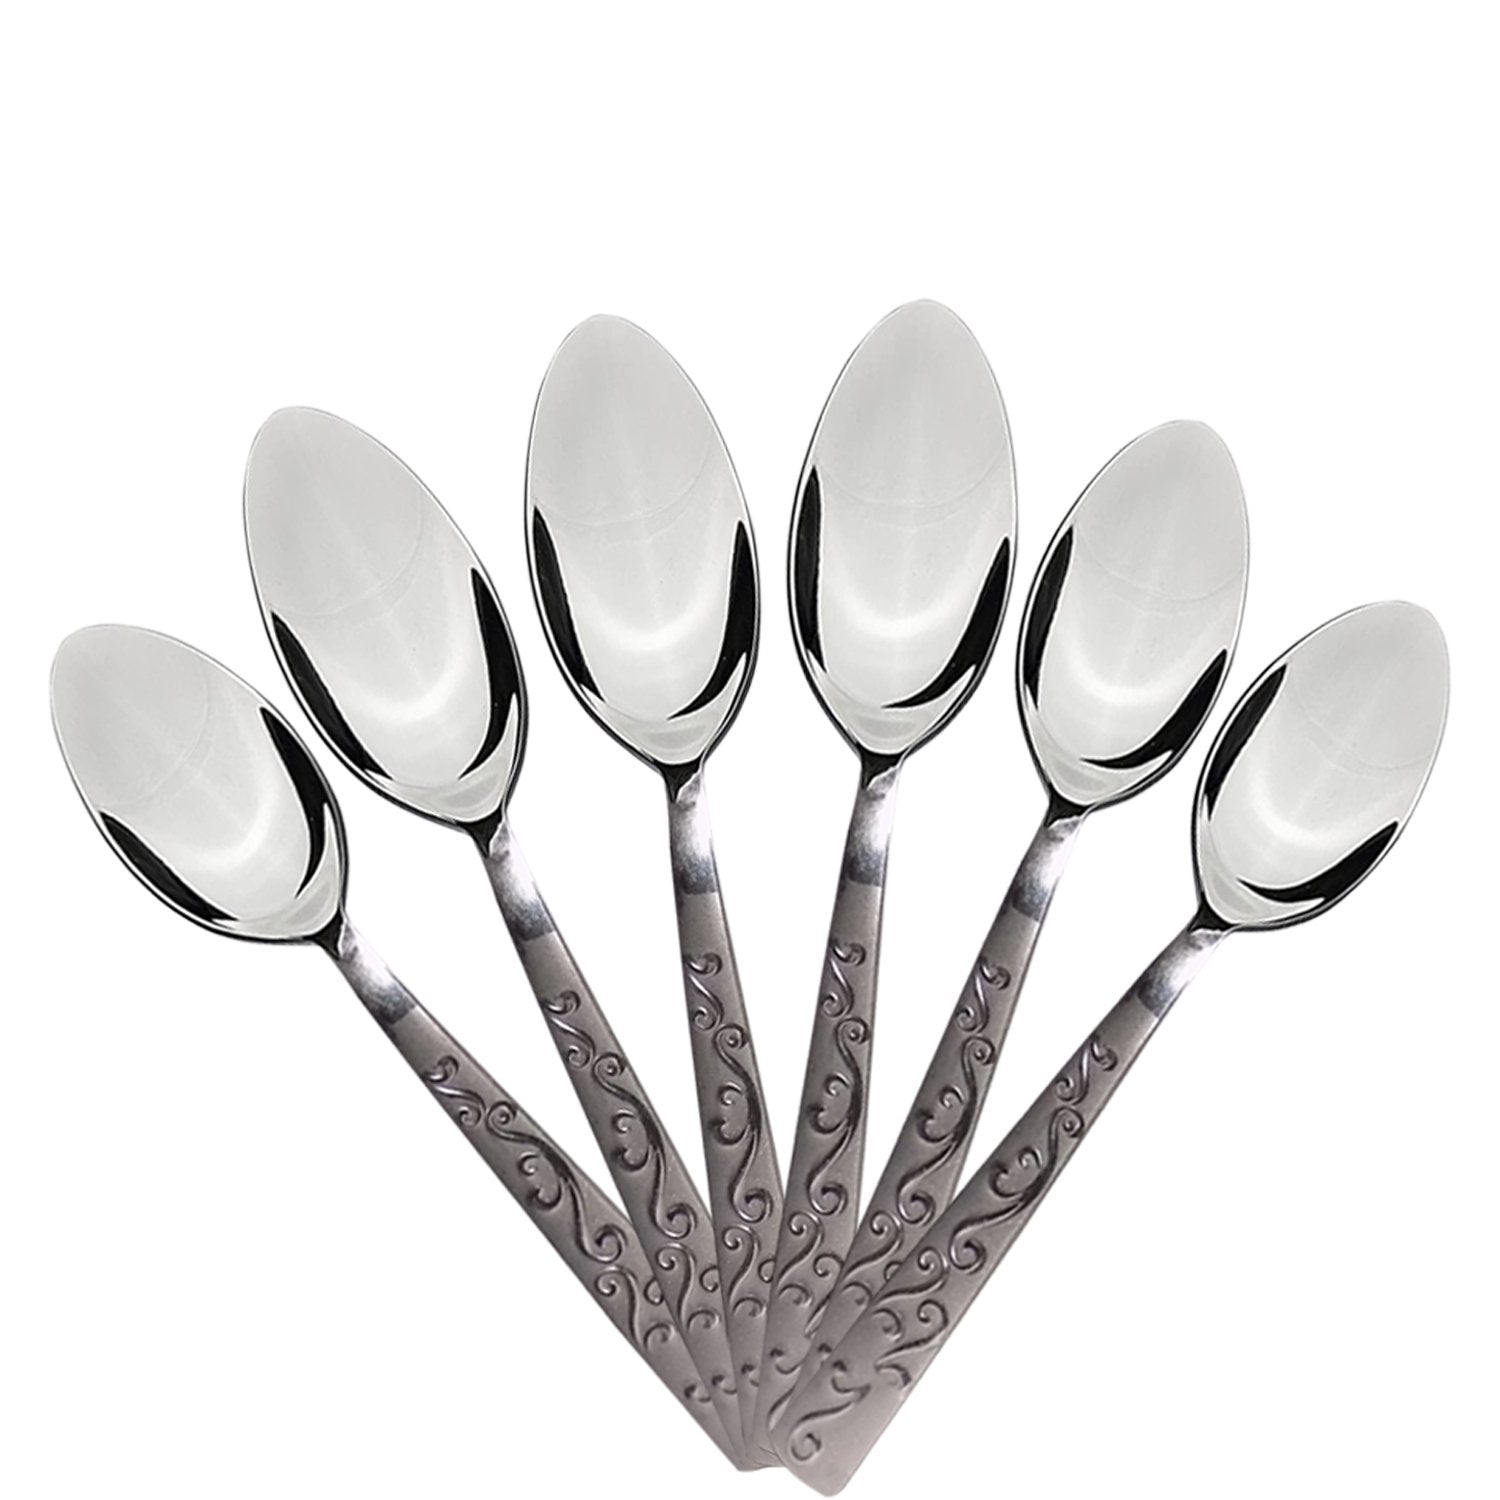 7003 Stainless Steel Small Spoon for Home/Kitchen (Set of 6) - SkyShopy